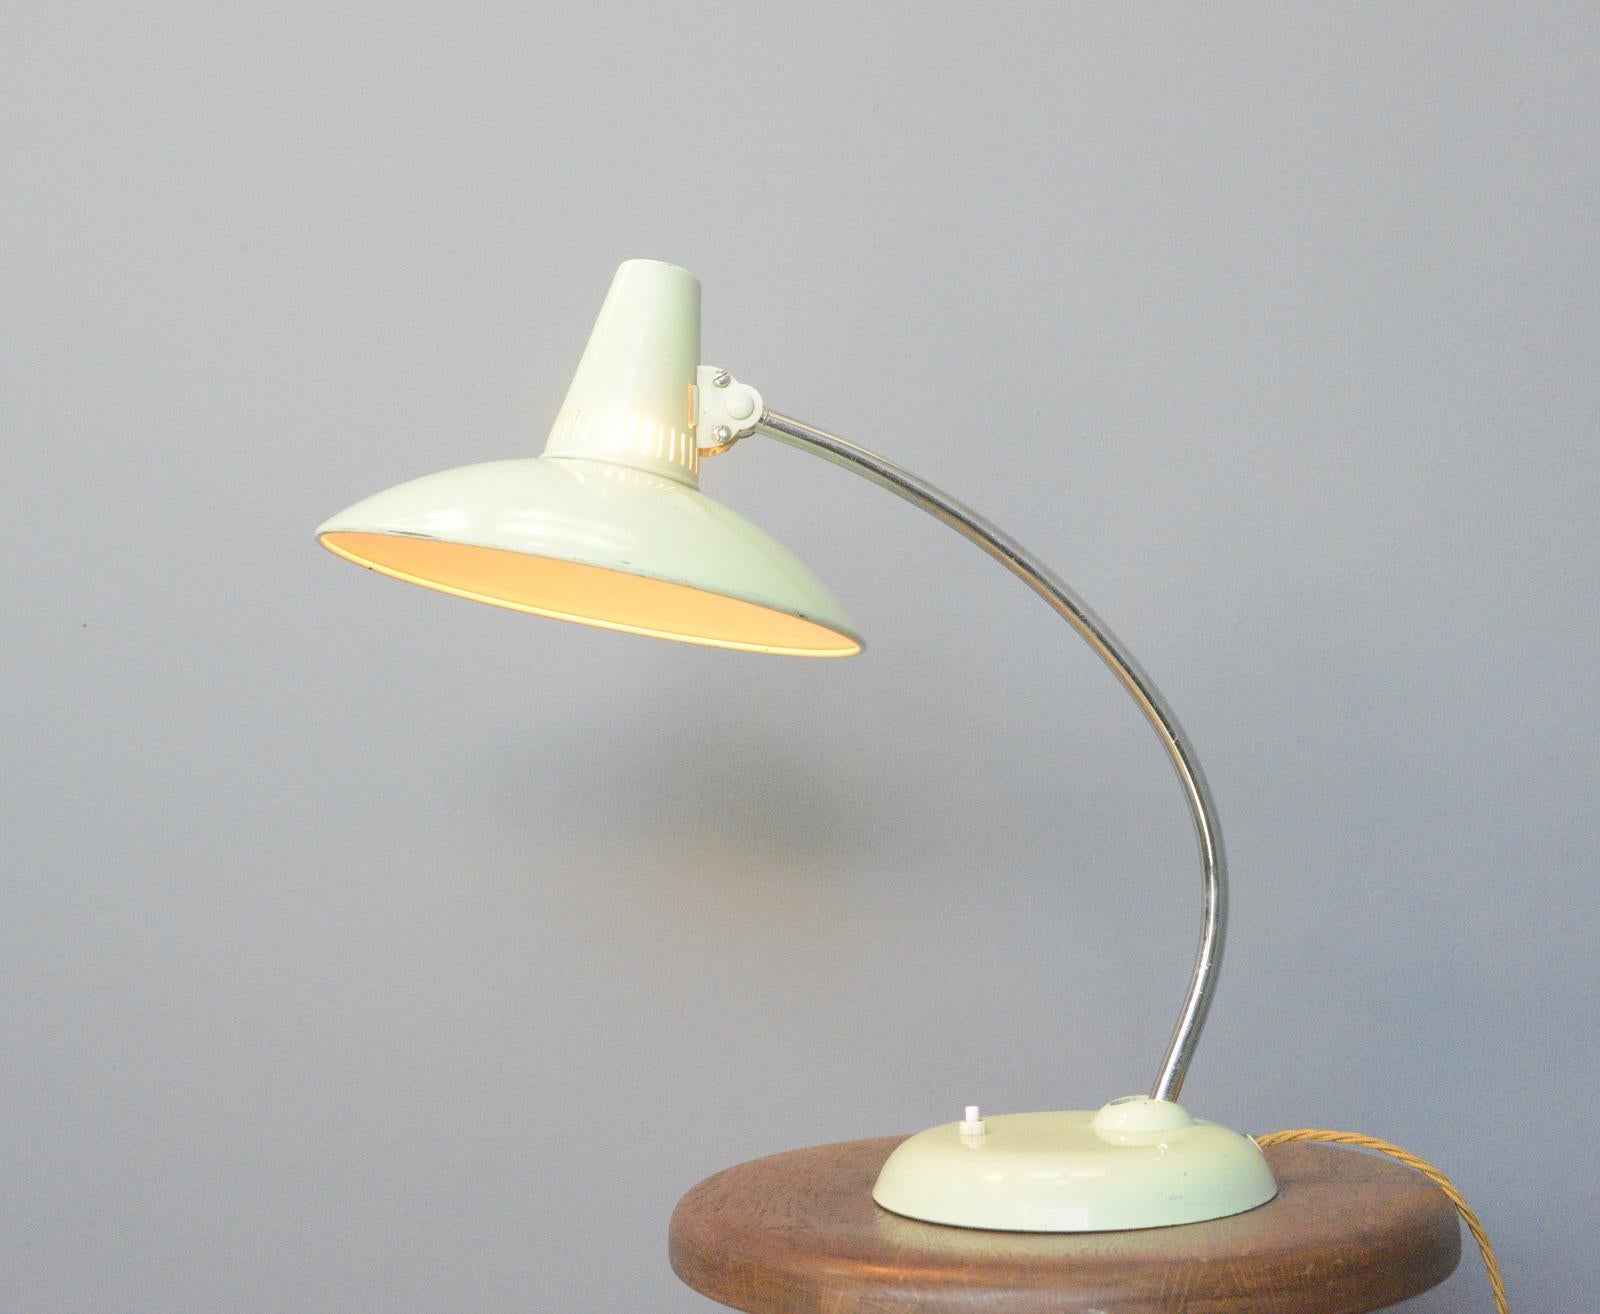 Mid Century Table Lamp By Kaiser Circa 1960s

- Original mint green paint
- On/Off switch on the base
- Takes E27 fitting bulbs
- Adjustable arm and shade
- Made by Gebr. Kaiser & Co. Leuchten KG
- German ~  1960s
- 47cm tall x 47cm deep x 25cm wide